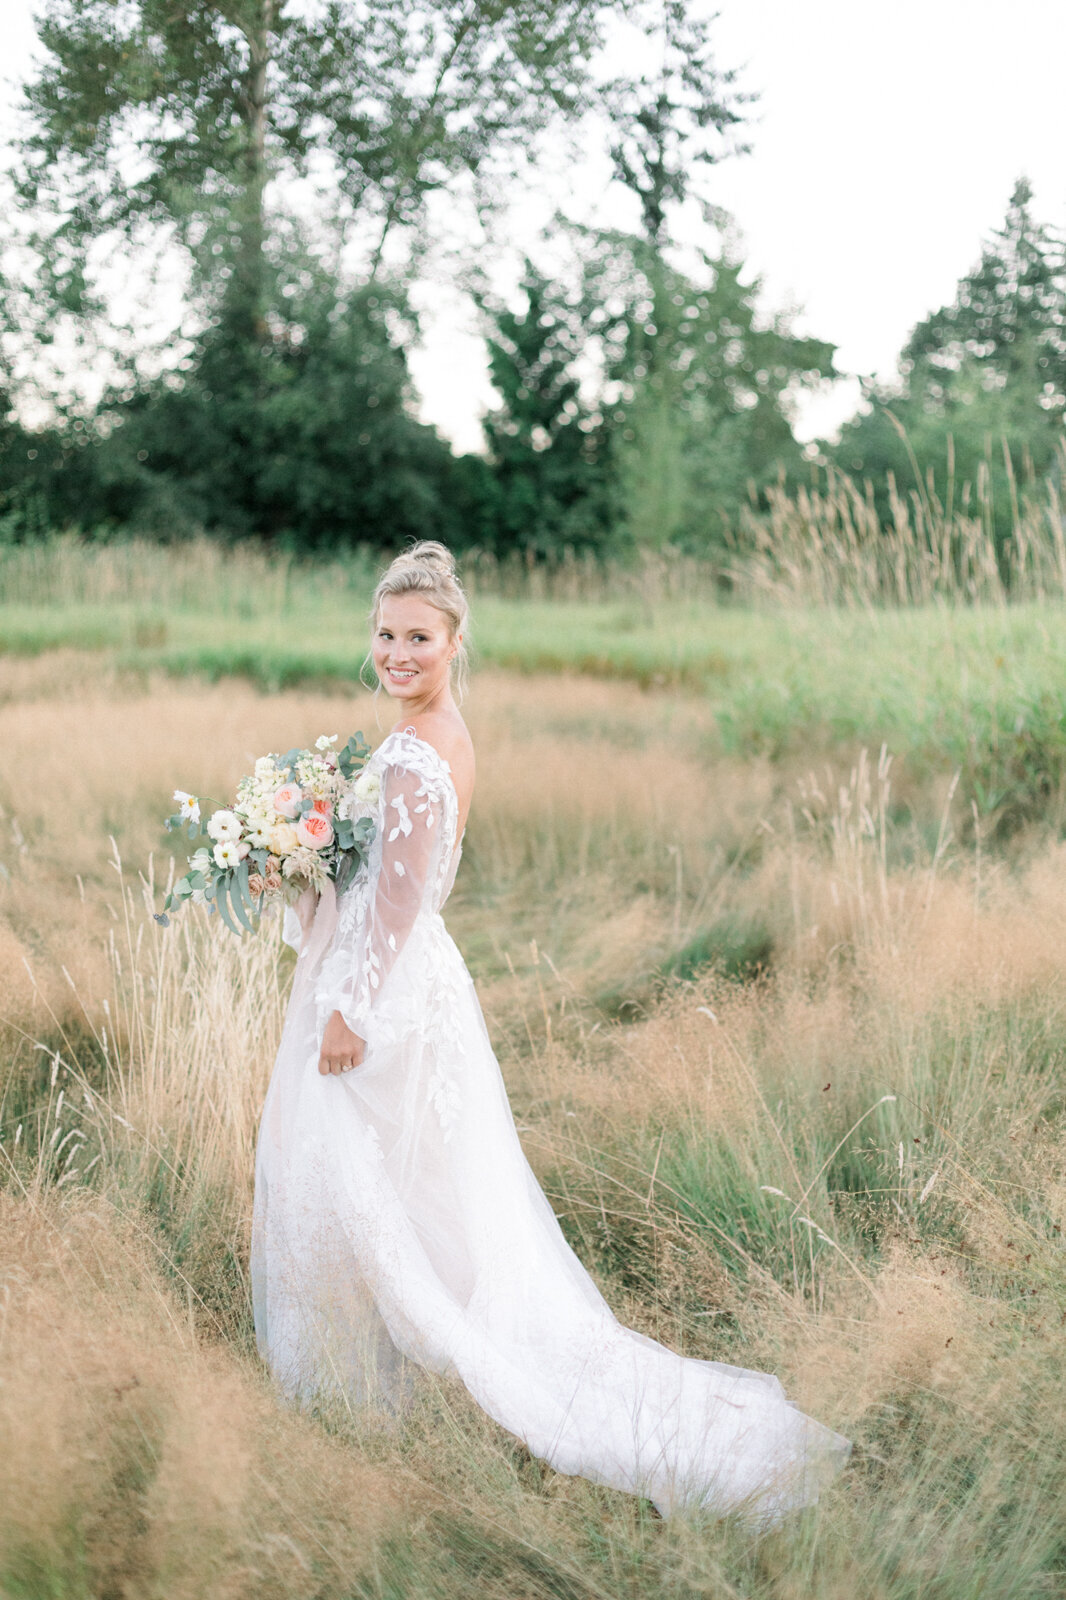 Stunning bridal inspiration; bride in wedding gown with long embroidered lace sleeves, standing in a field holding bouquet, captured by Ana Douglas Photography, timeless and authentic wedding photographer in Vancouver, BC. Featured on the Bronte Bride Vendor Guide.